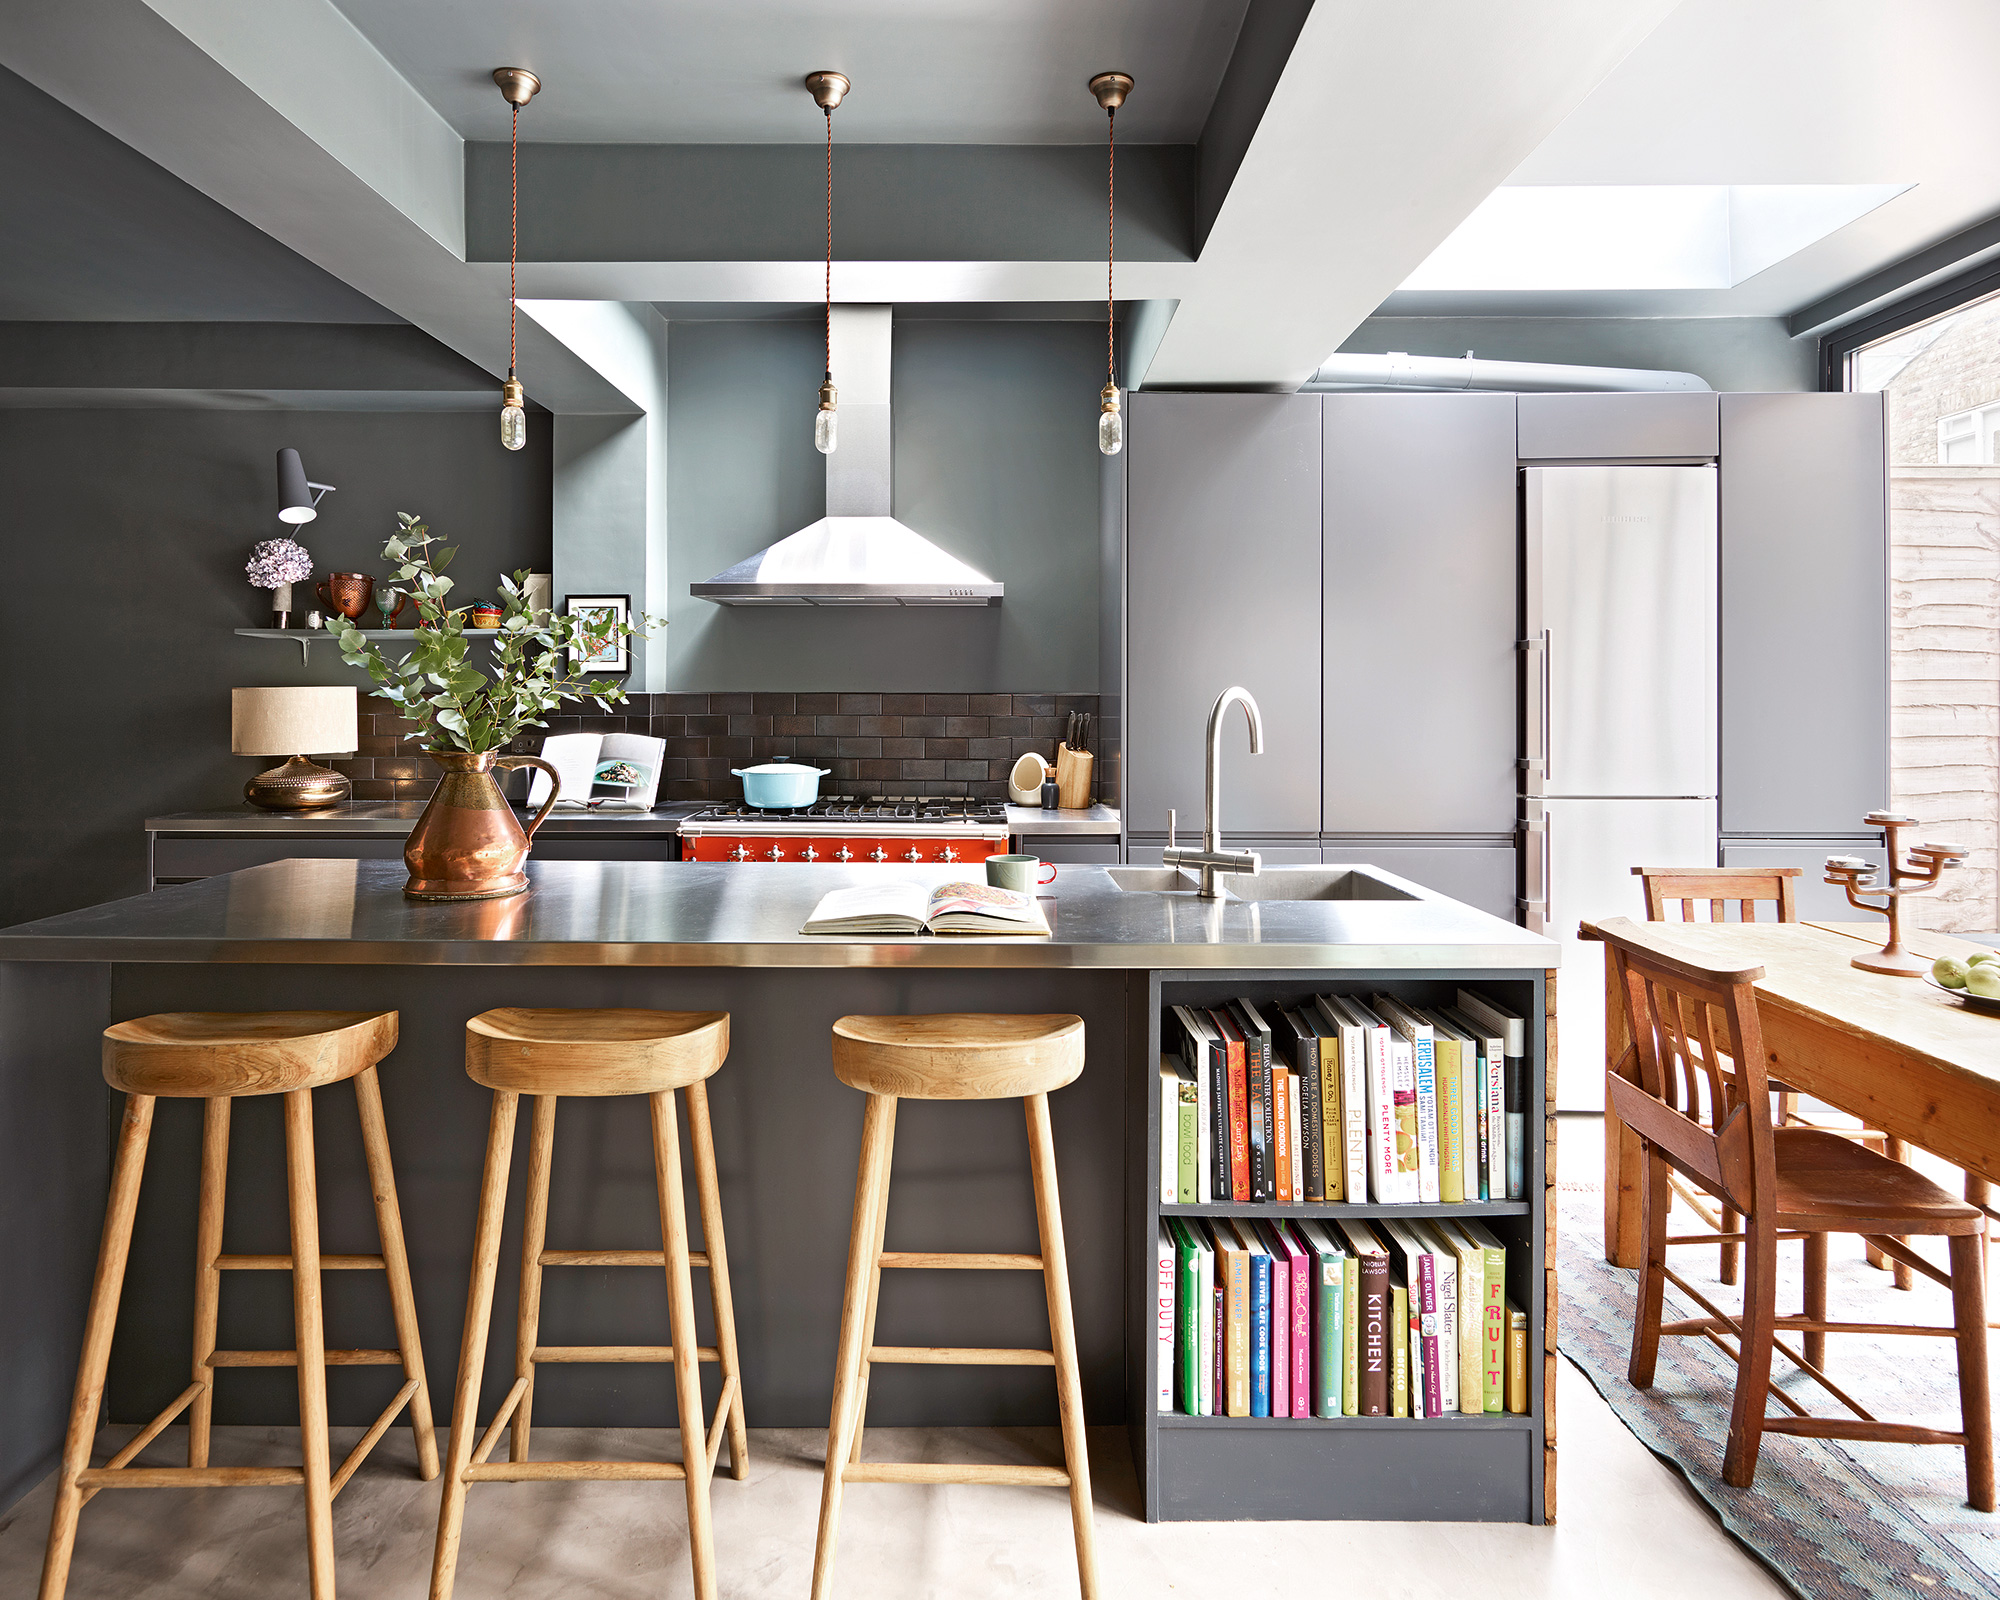 Gray open plan kitchen ideas example with a skylight and built in breakfast bar.